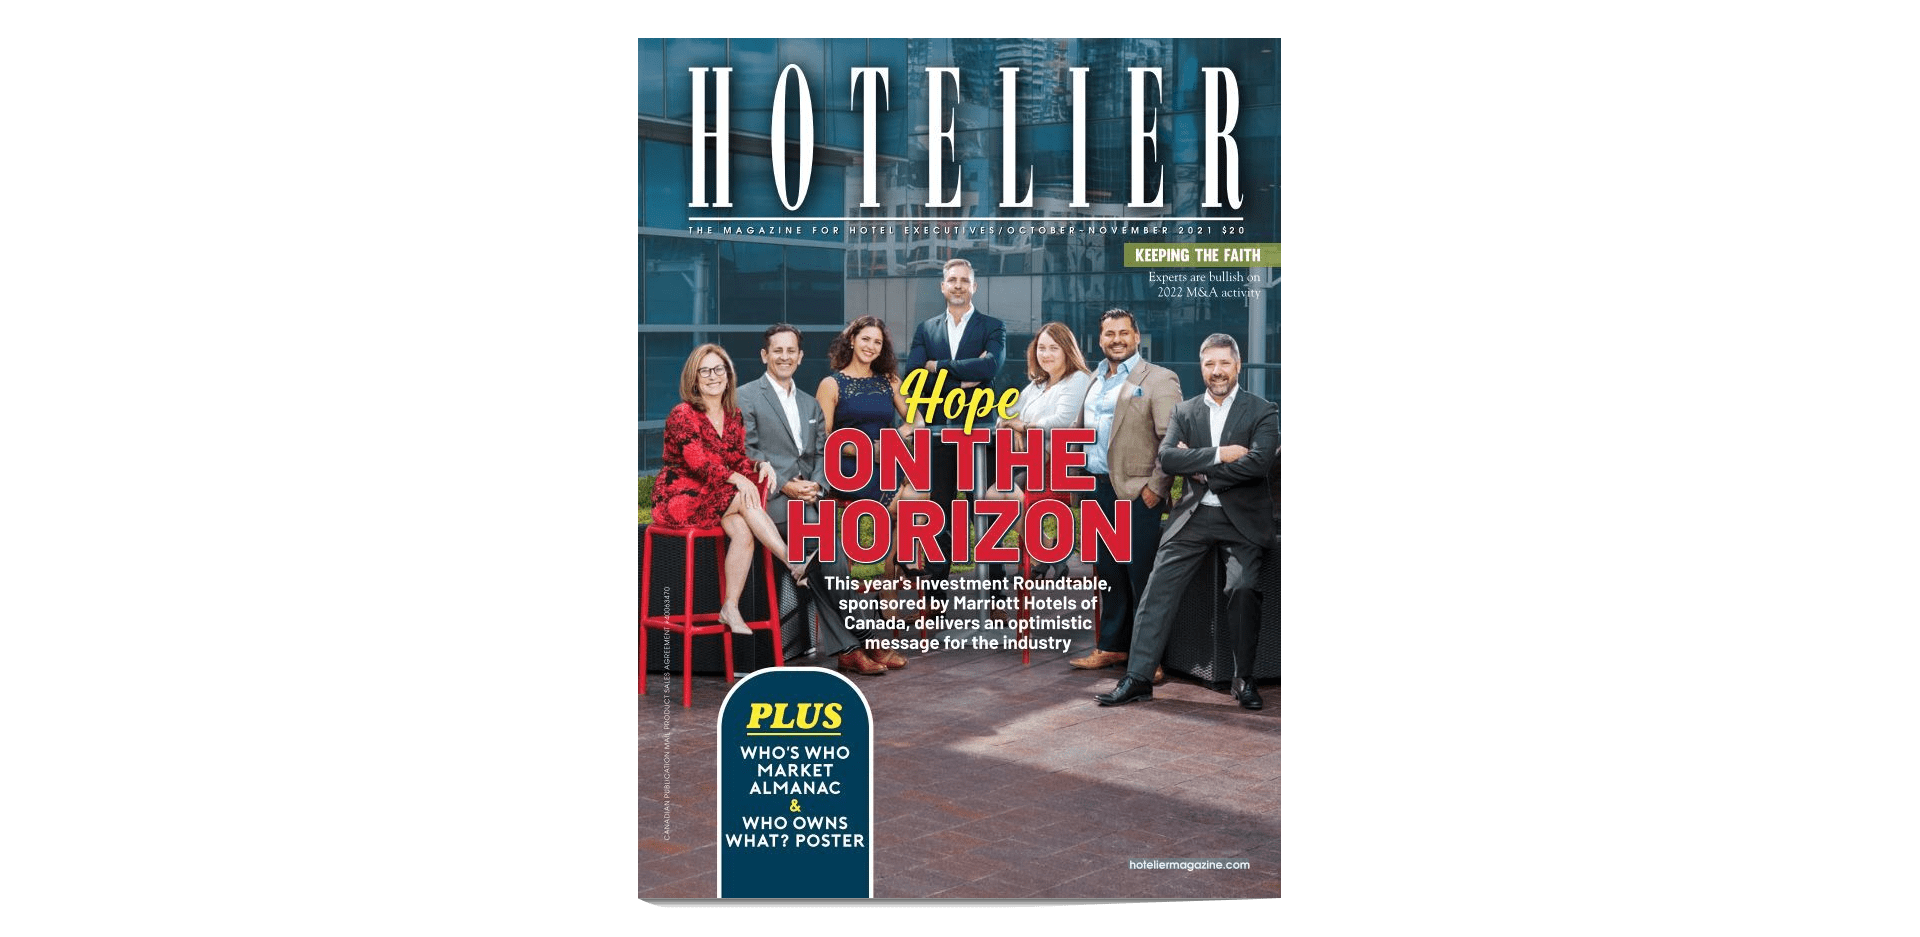 CFO Capital’s participation in this year's Hoteliers Investment Roundtable discussion